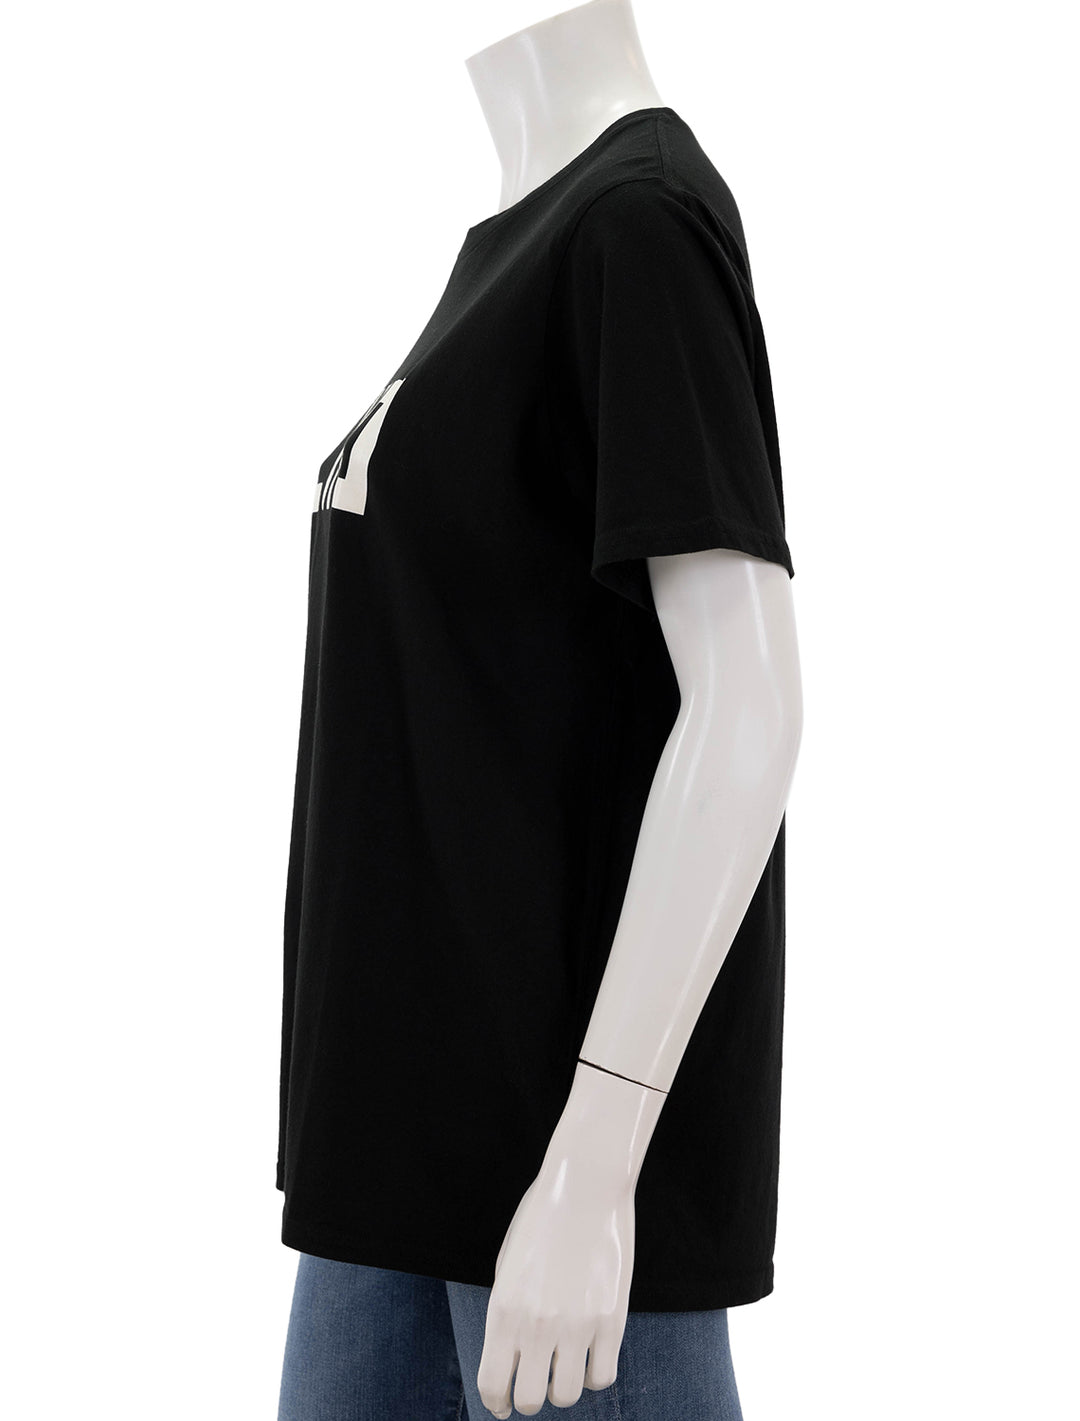 Side view of Clare V.'s original tee in black and cream ciao.